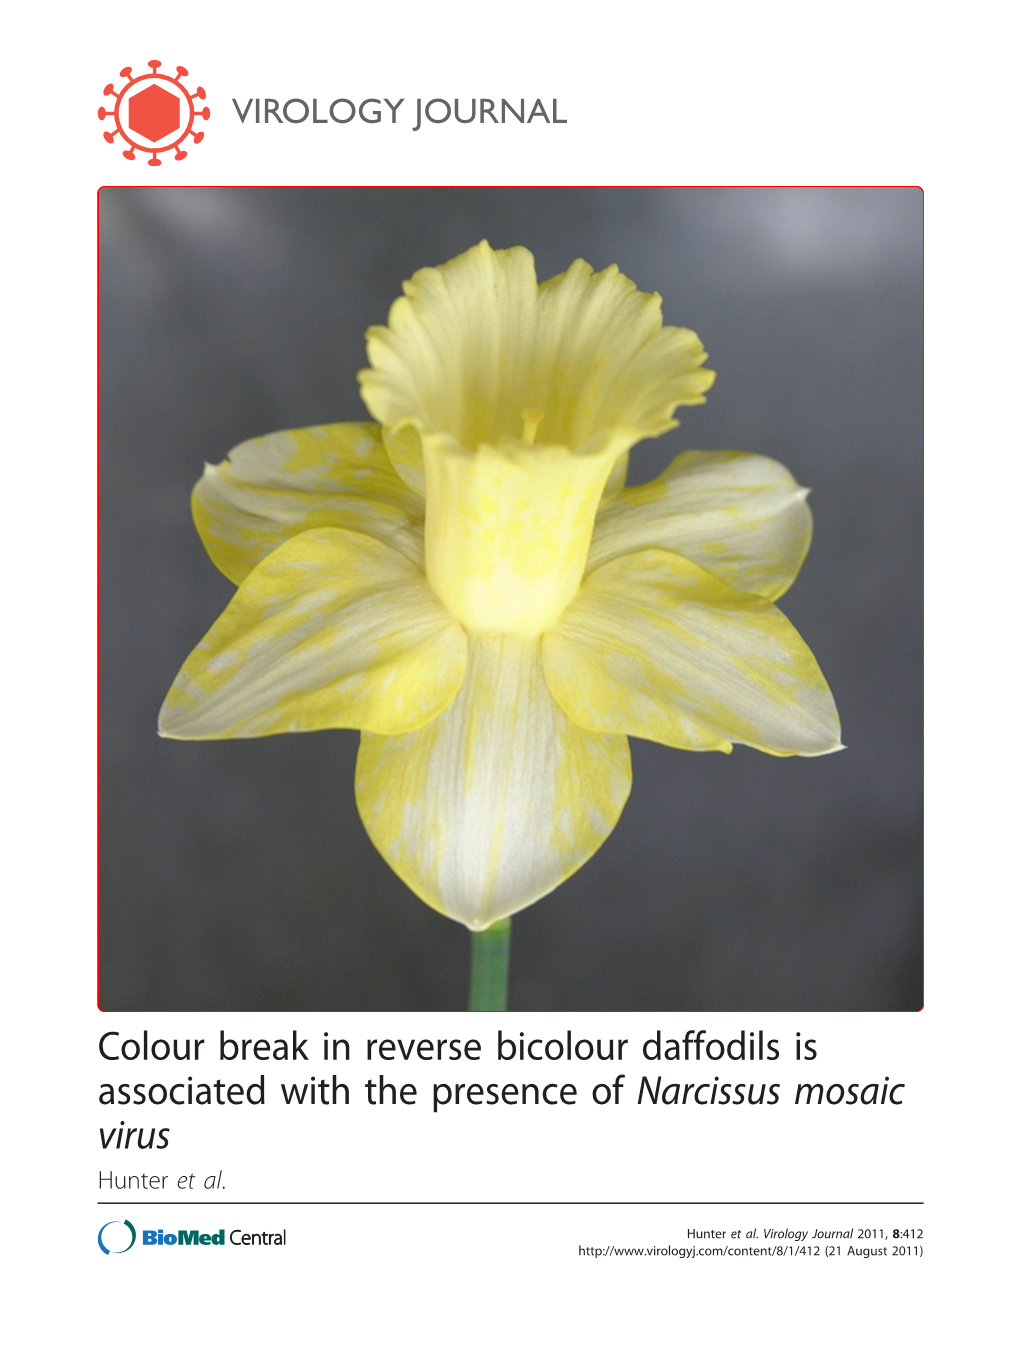 Colour Break in Reverse Bicolour Daffodils Is Associated with the Presence of Narcissus Mosaic Virus Hunter Et Al